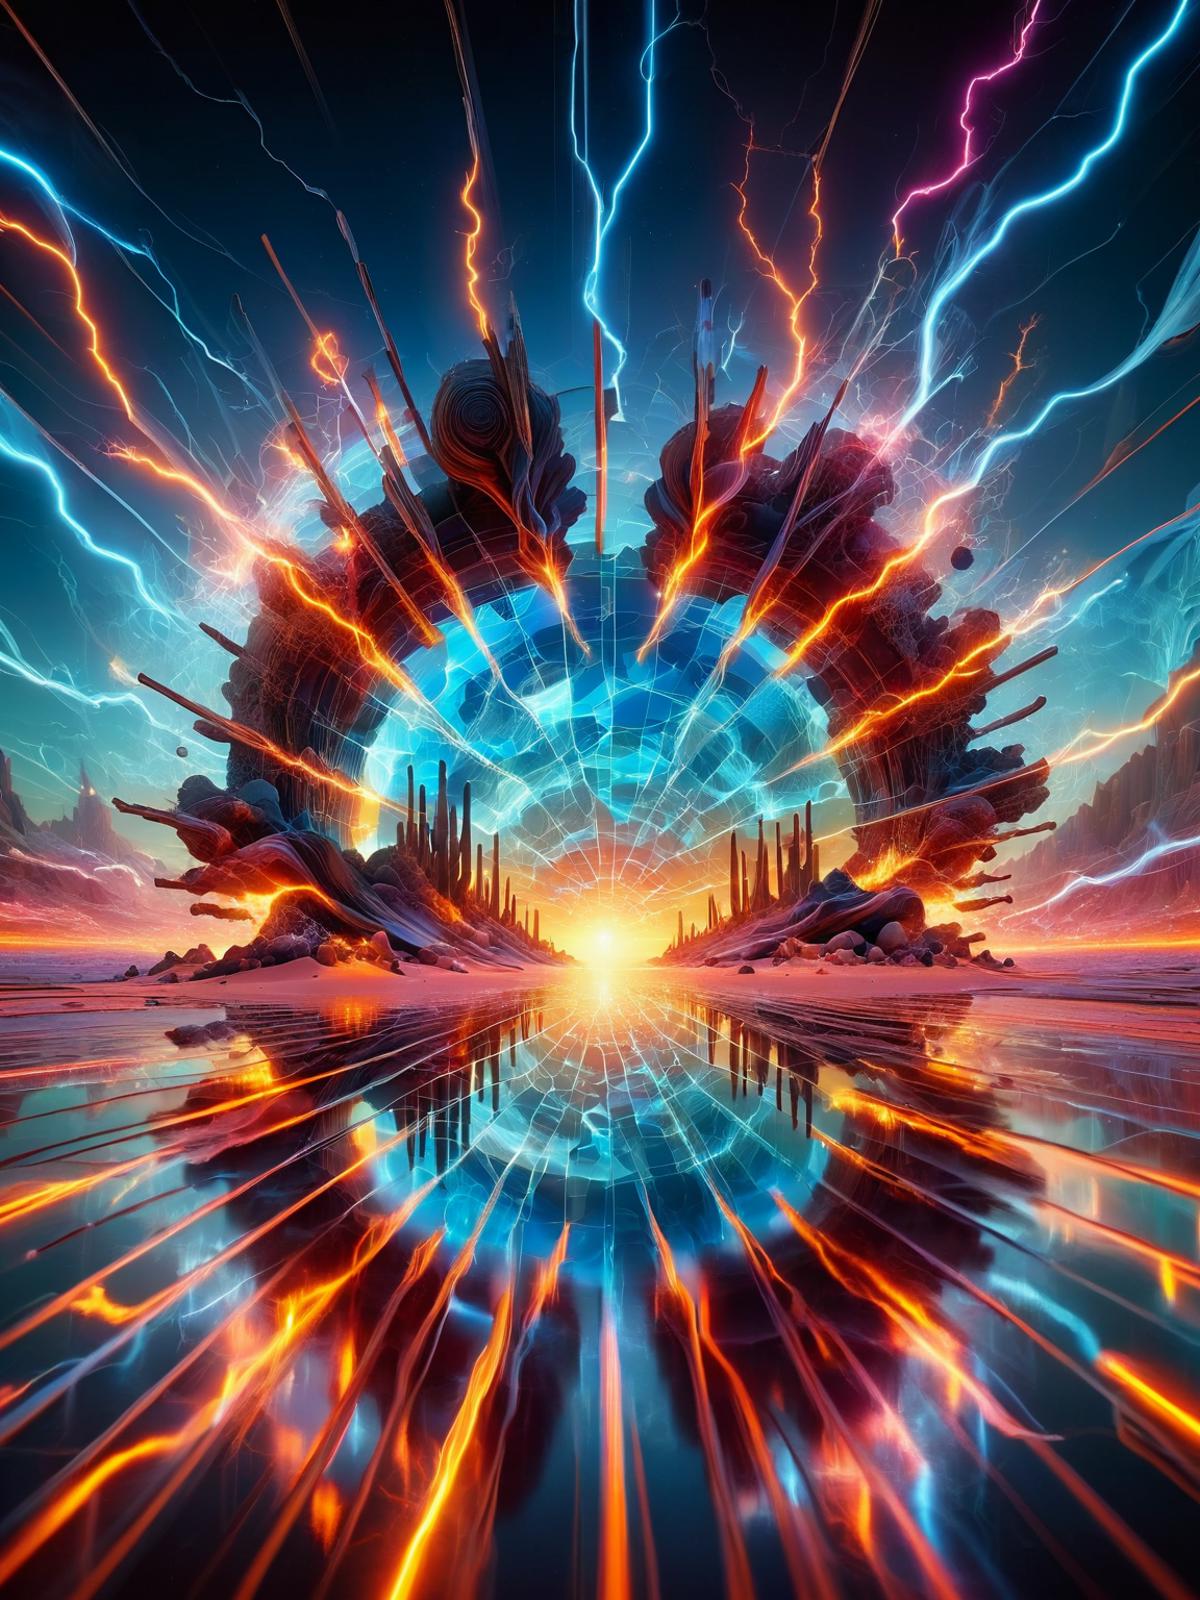 A vibrant digital art piece featuring a colorful, abstracted landscape with a sun at the center, surrounded by a swirling vortex of bright colors and lightning bolts. The scene captures a sense of energy and movement, creating a visually striking and dynamic composition.